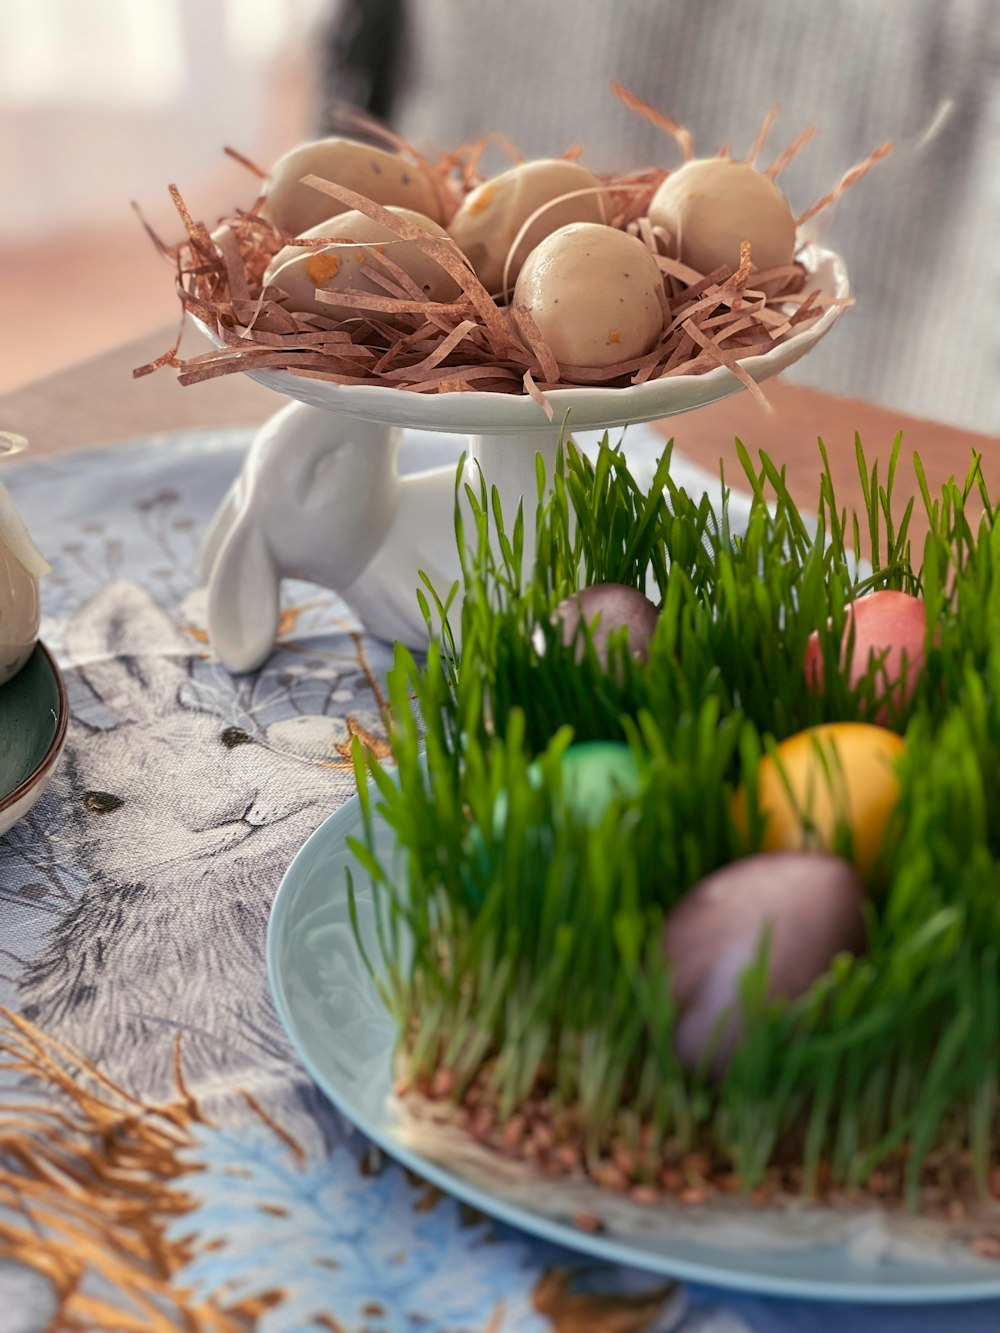 a plate of eggs and grass on a table